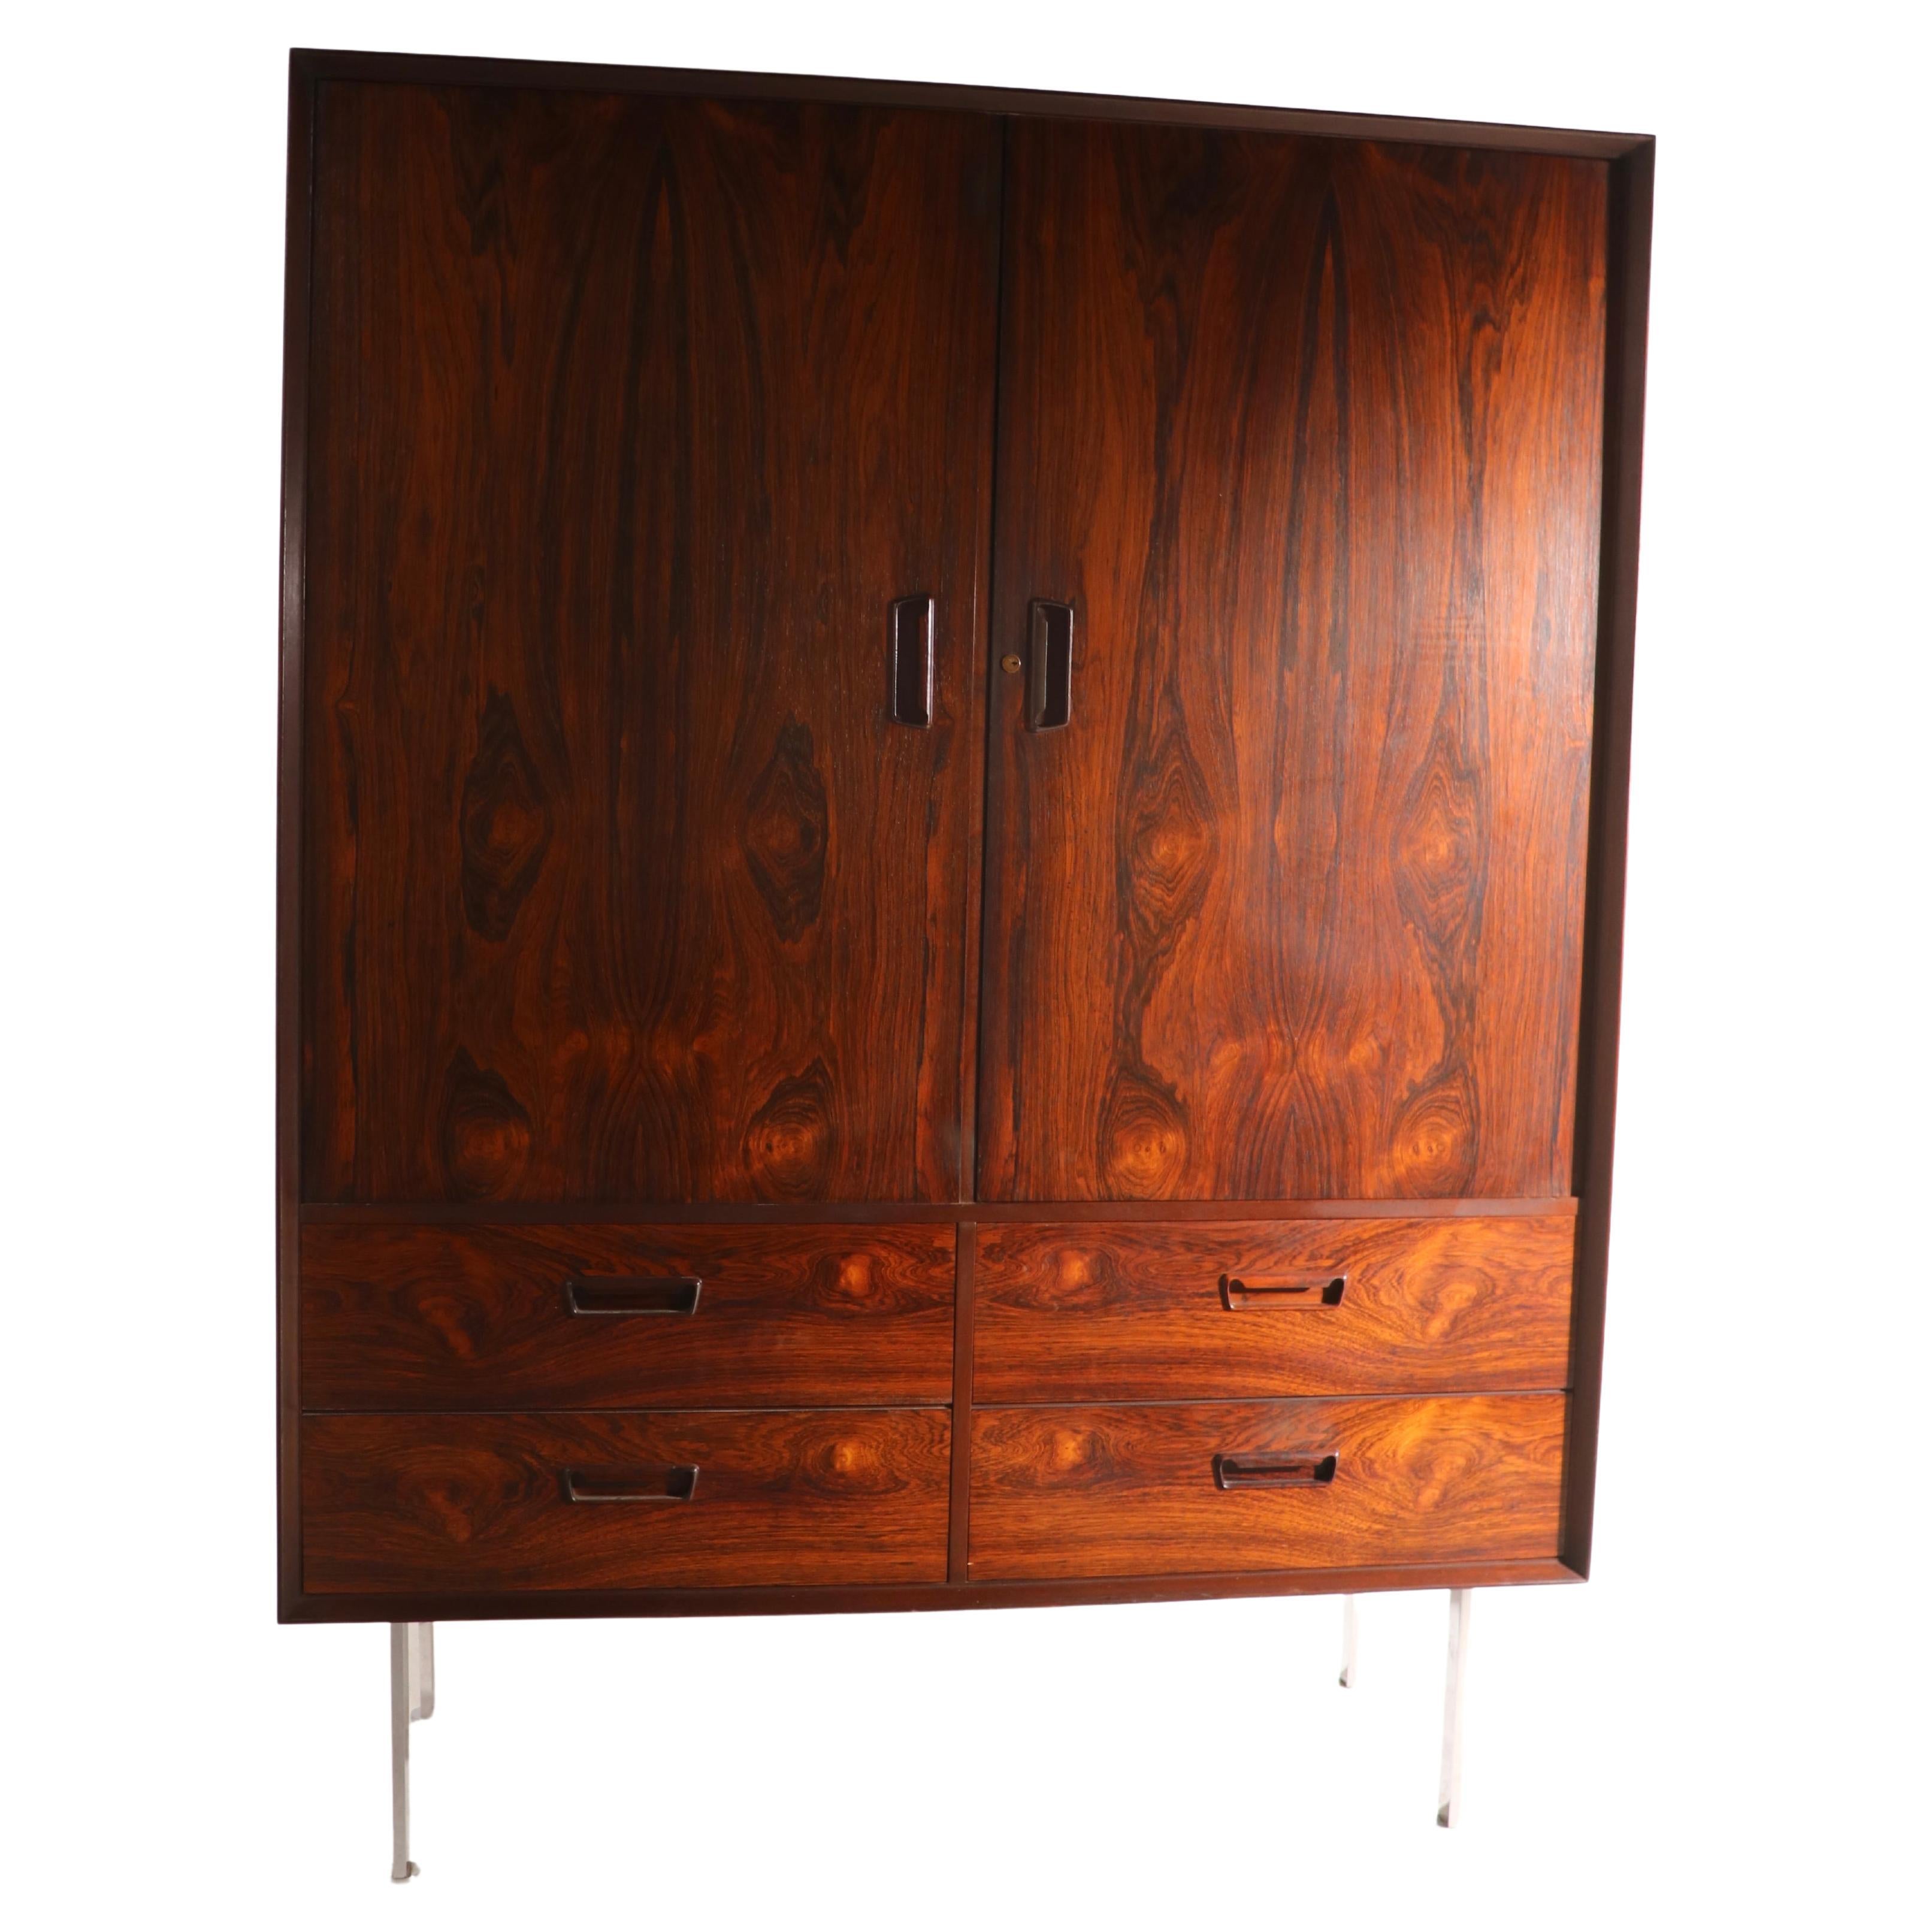 Spectacular rosewood chifforobe on bright come legs. The cabinet features a vibrant rosewood veneer case with two large doors, which open to reveal interior drawers, and shelved storage space. Underneath the doors are two additional drawers,